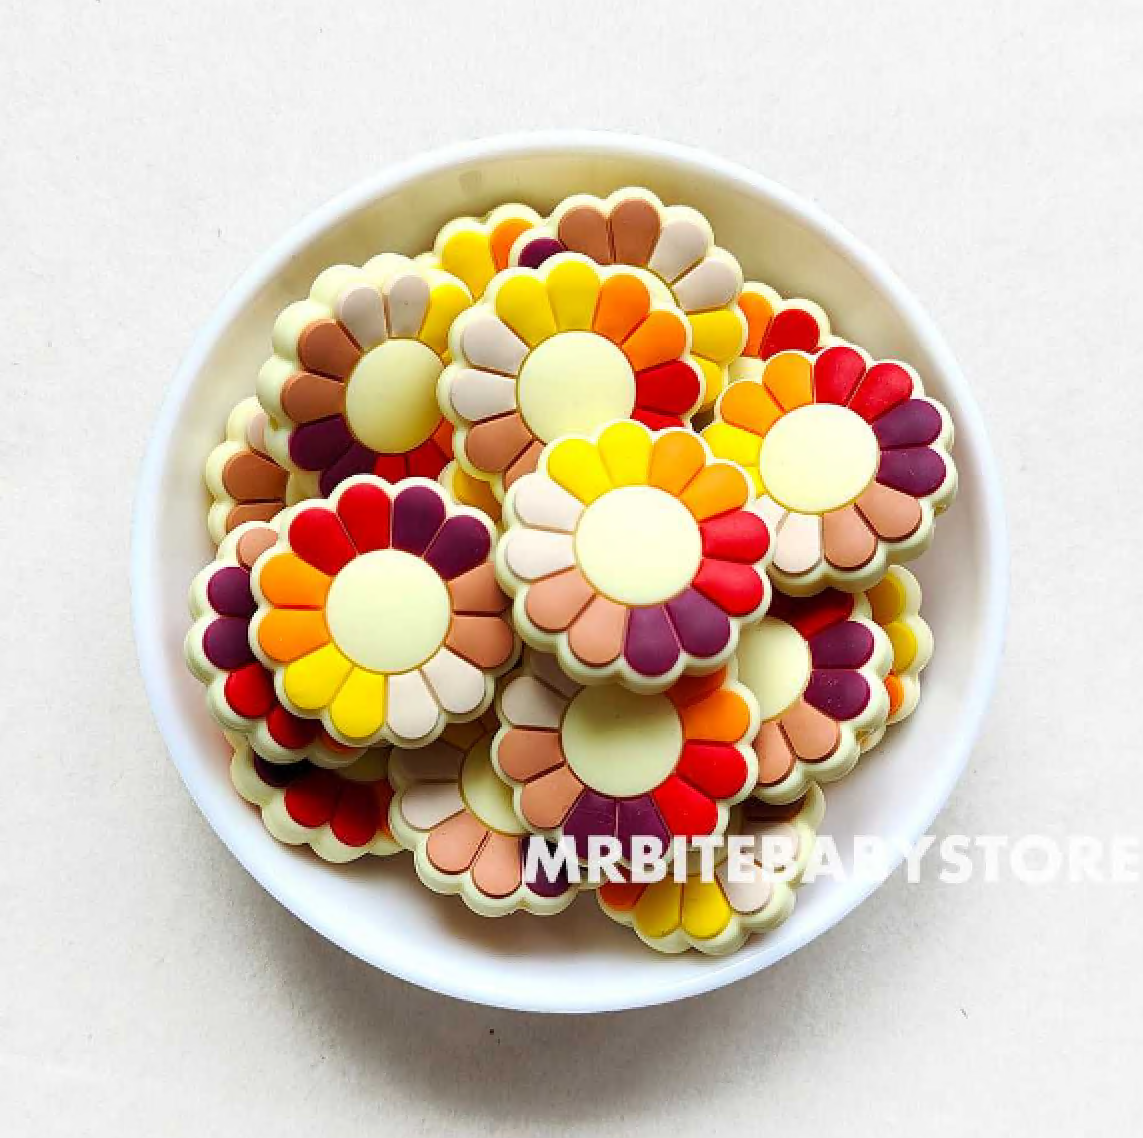 Sun Flower Silicone Beads - 28*28mm